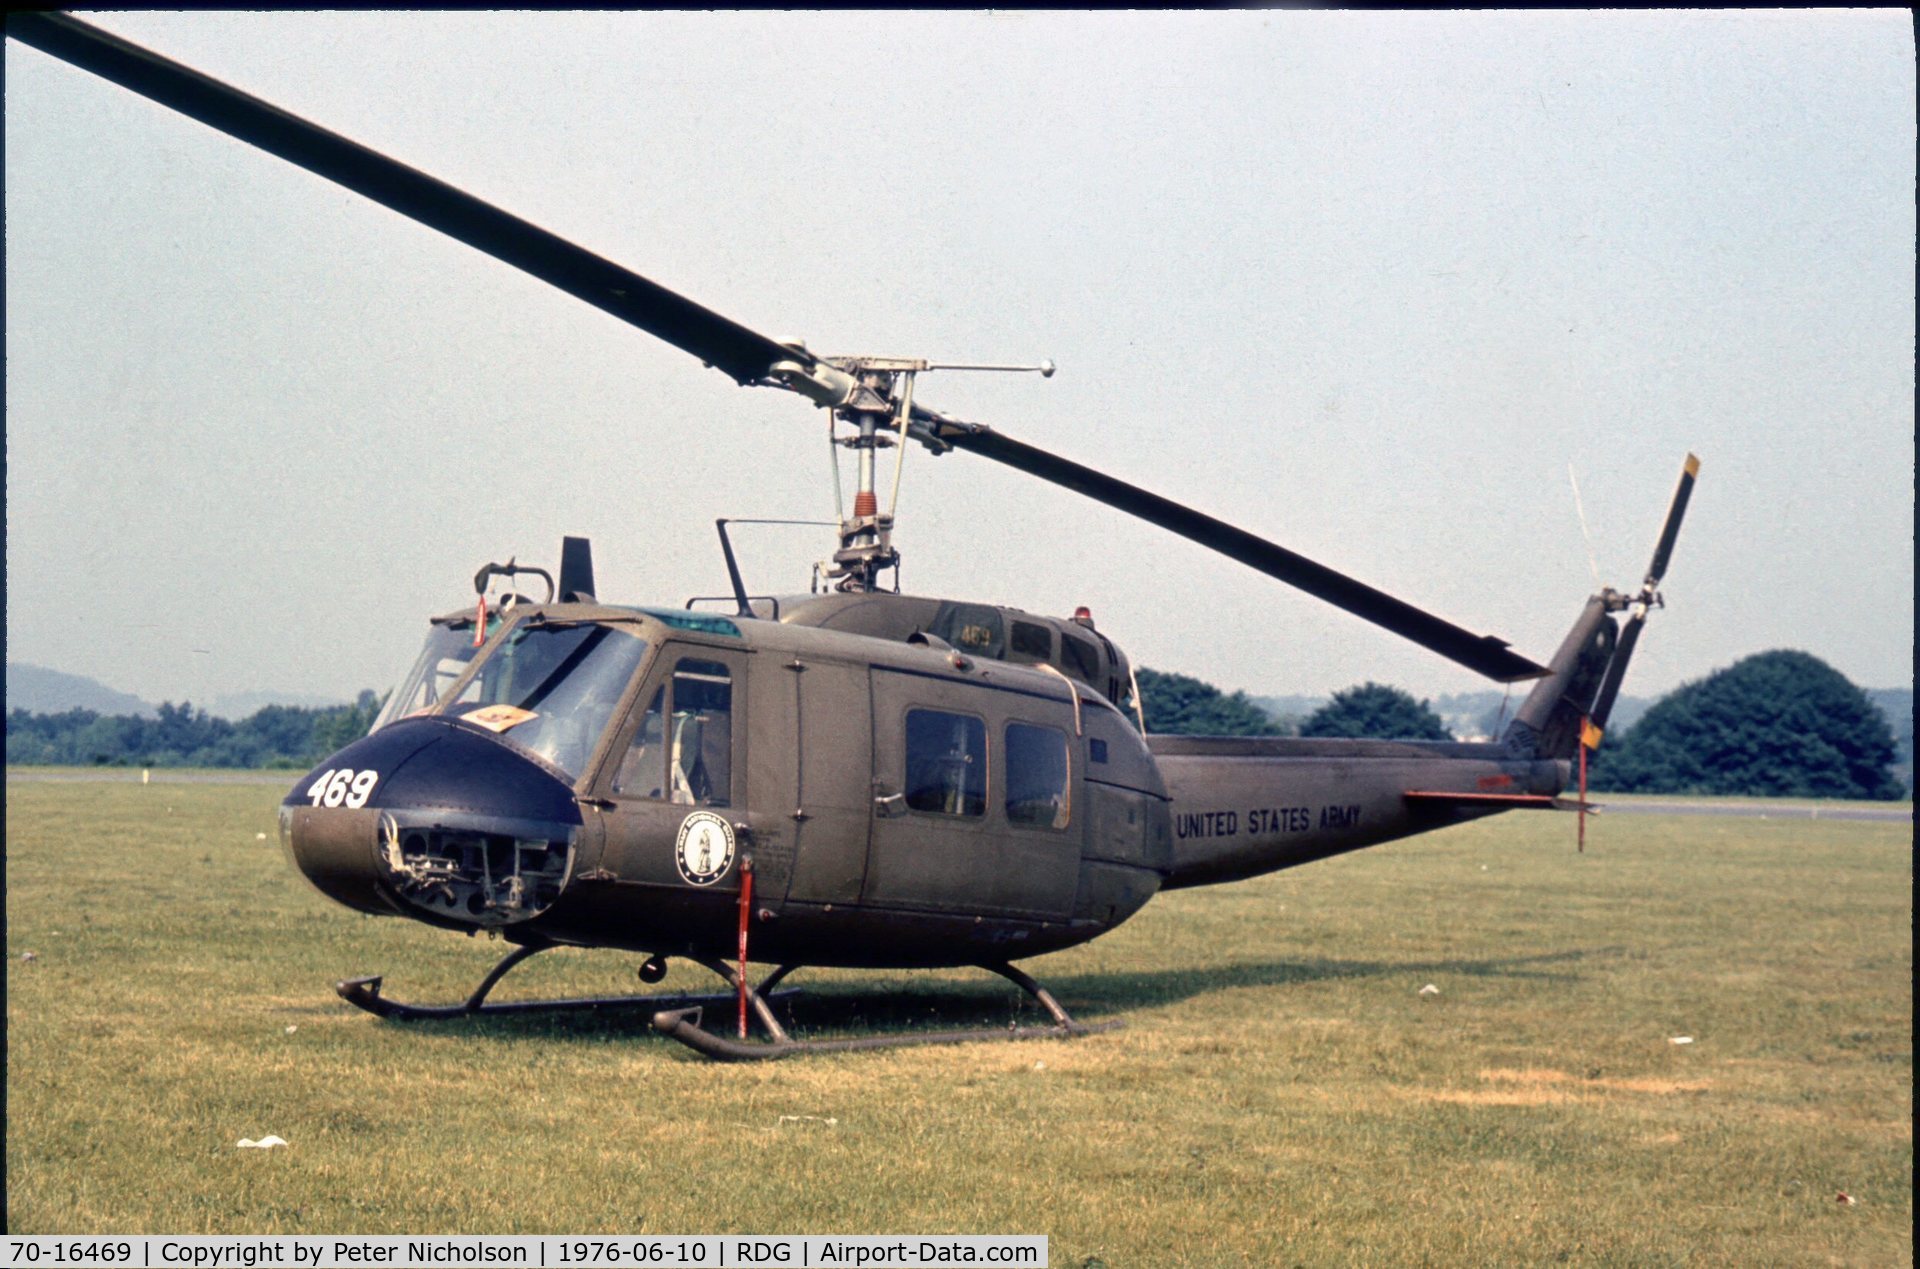 70-16469, 1970 Bell UH-1H Iroquois C/N 12774, UH-1H Iroquois of 28 Aviation Battalion Pennsylvania Army National Guard was a visitor at the 1976 Reading Air Show